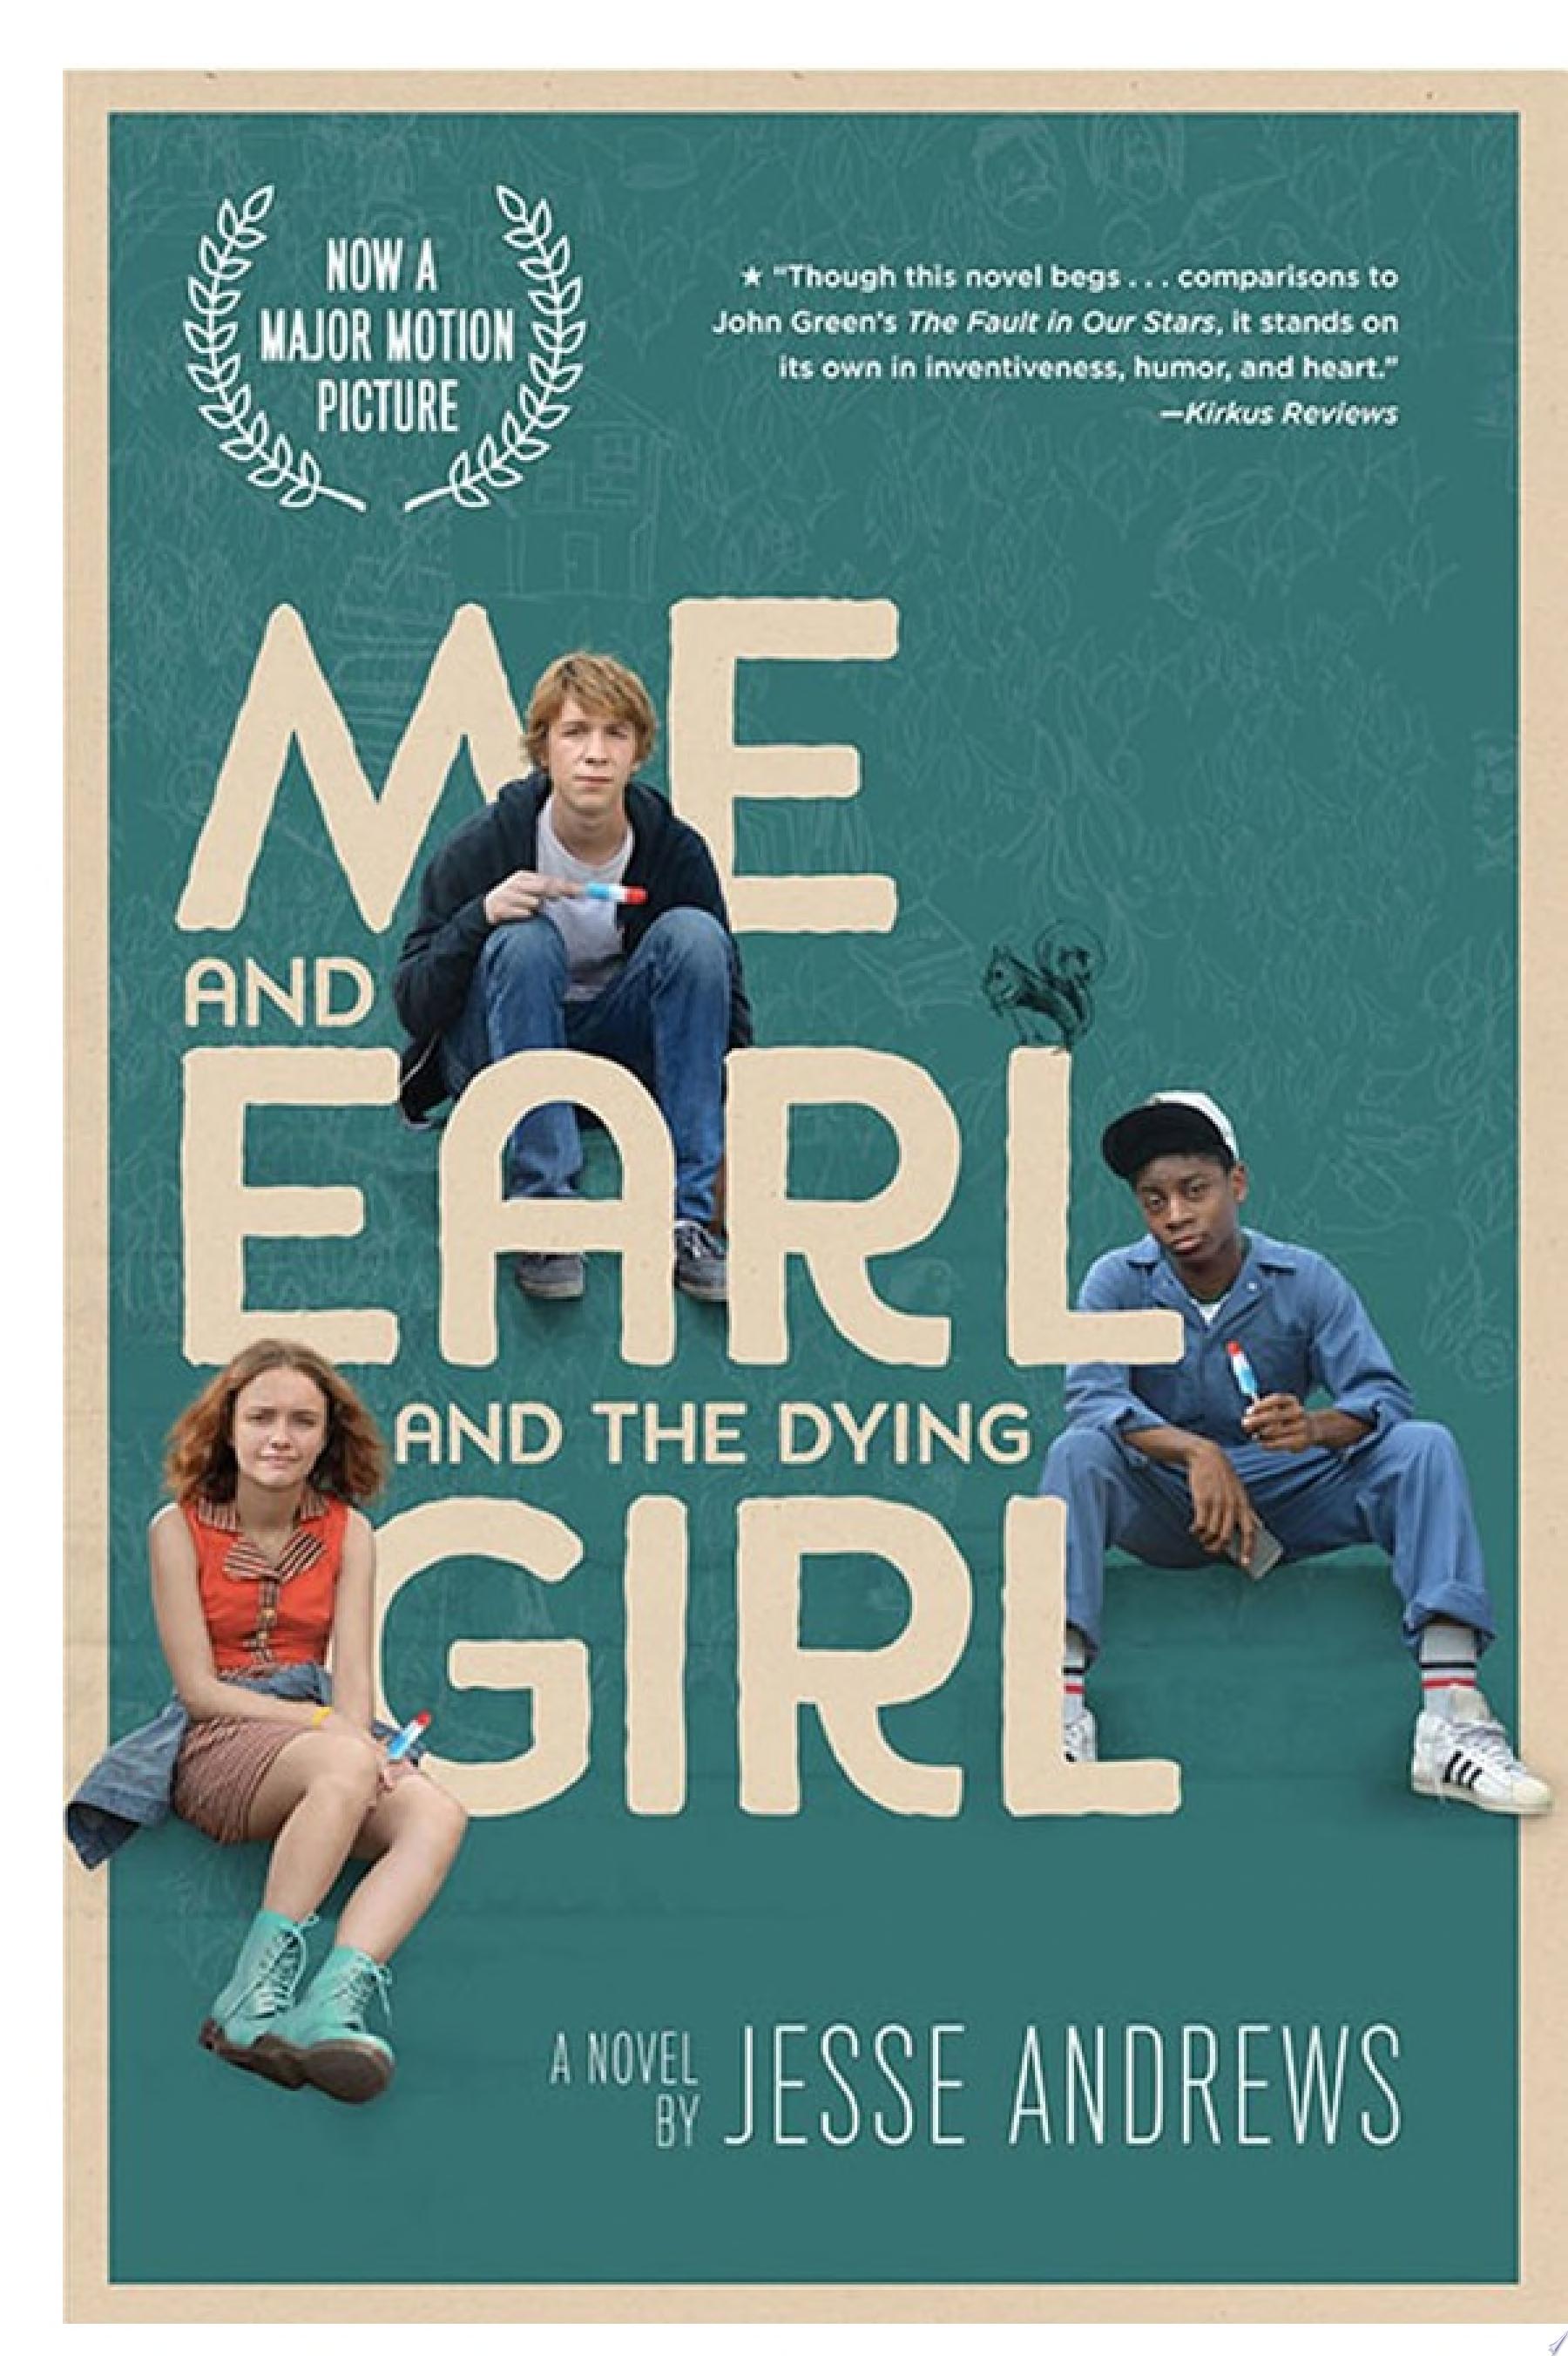 Image for "Me and Earl and the Dying Girl 